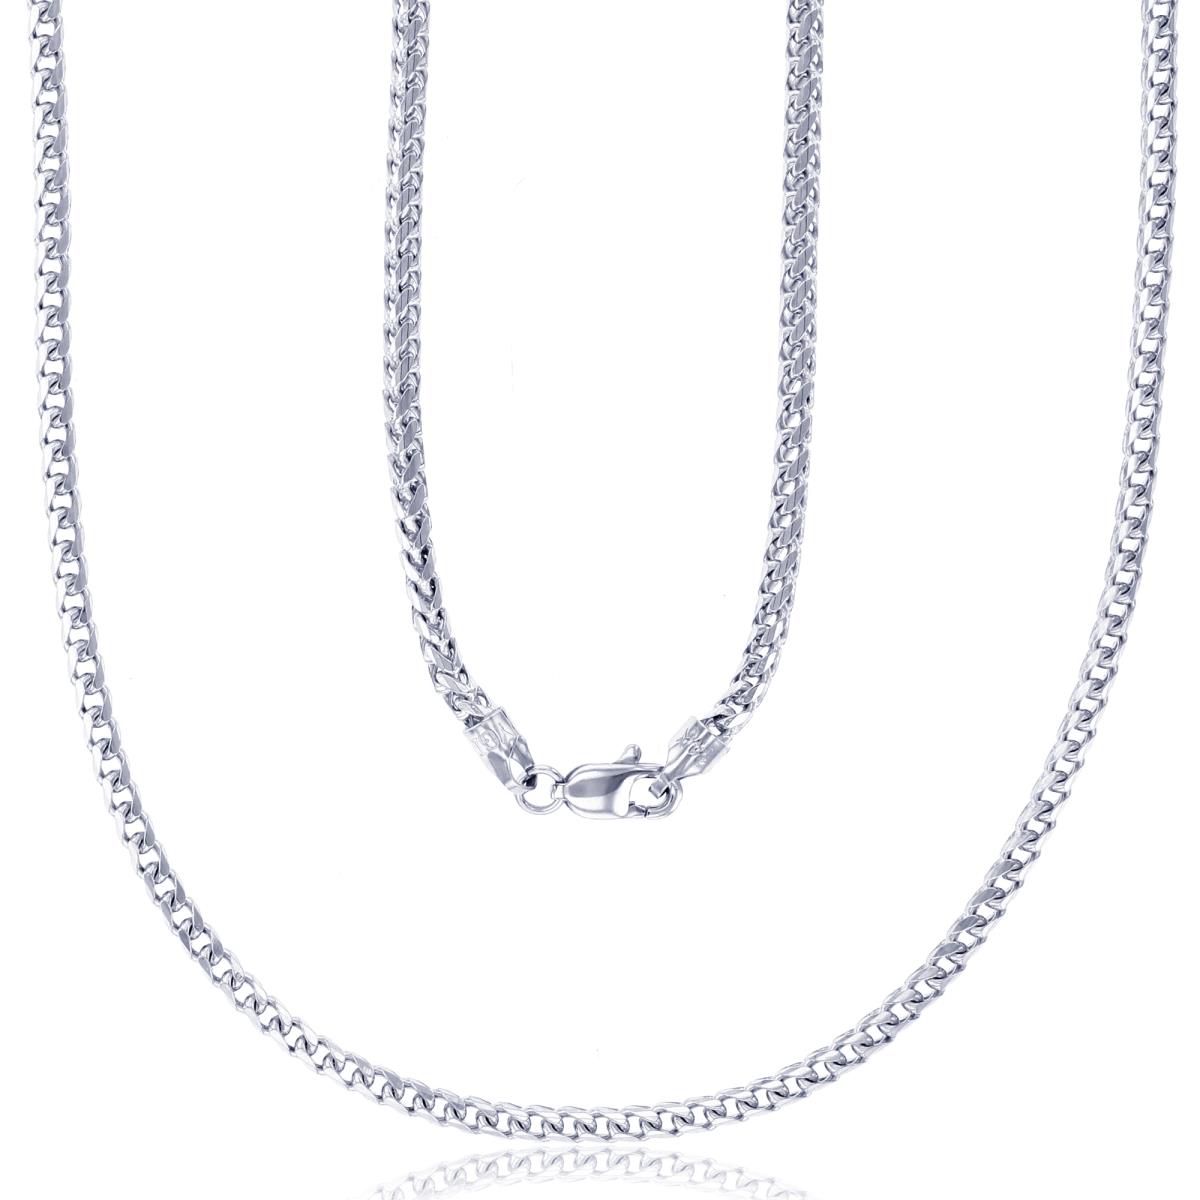 14K White Gold 2.75mm 22" Solid Franco 080 Chain